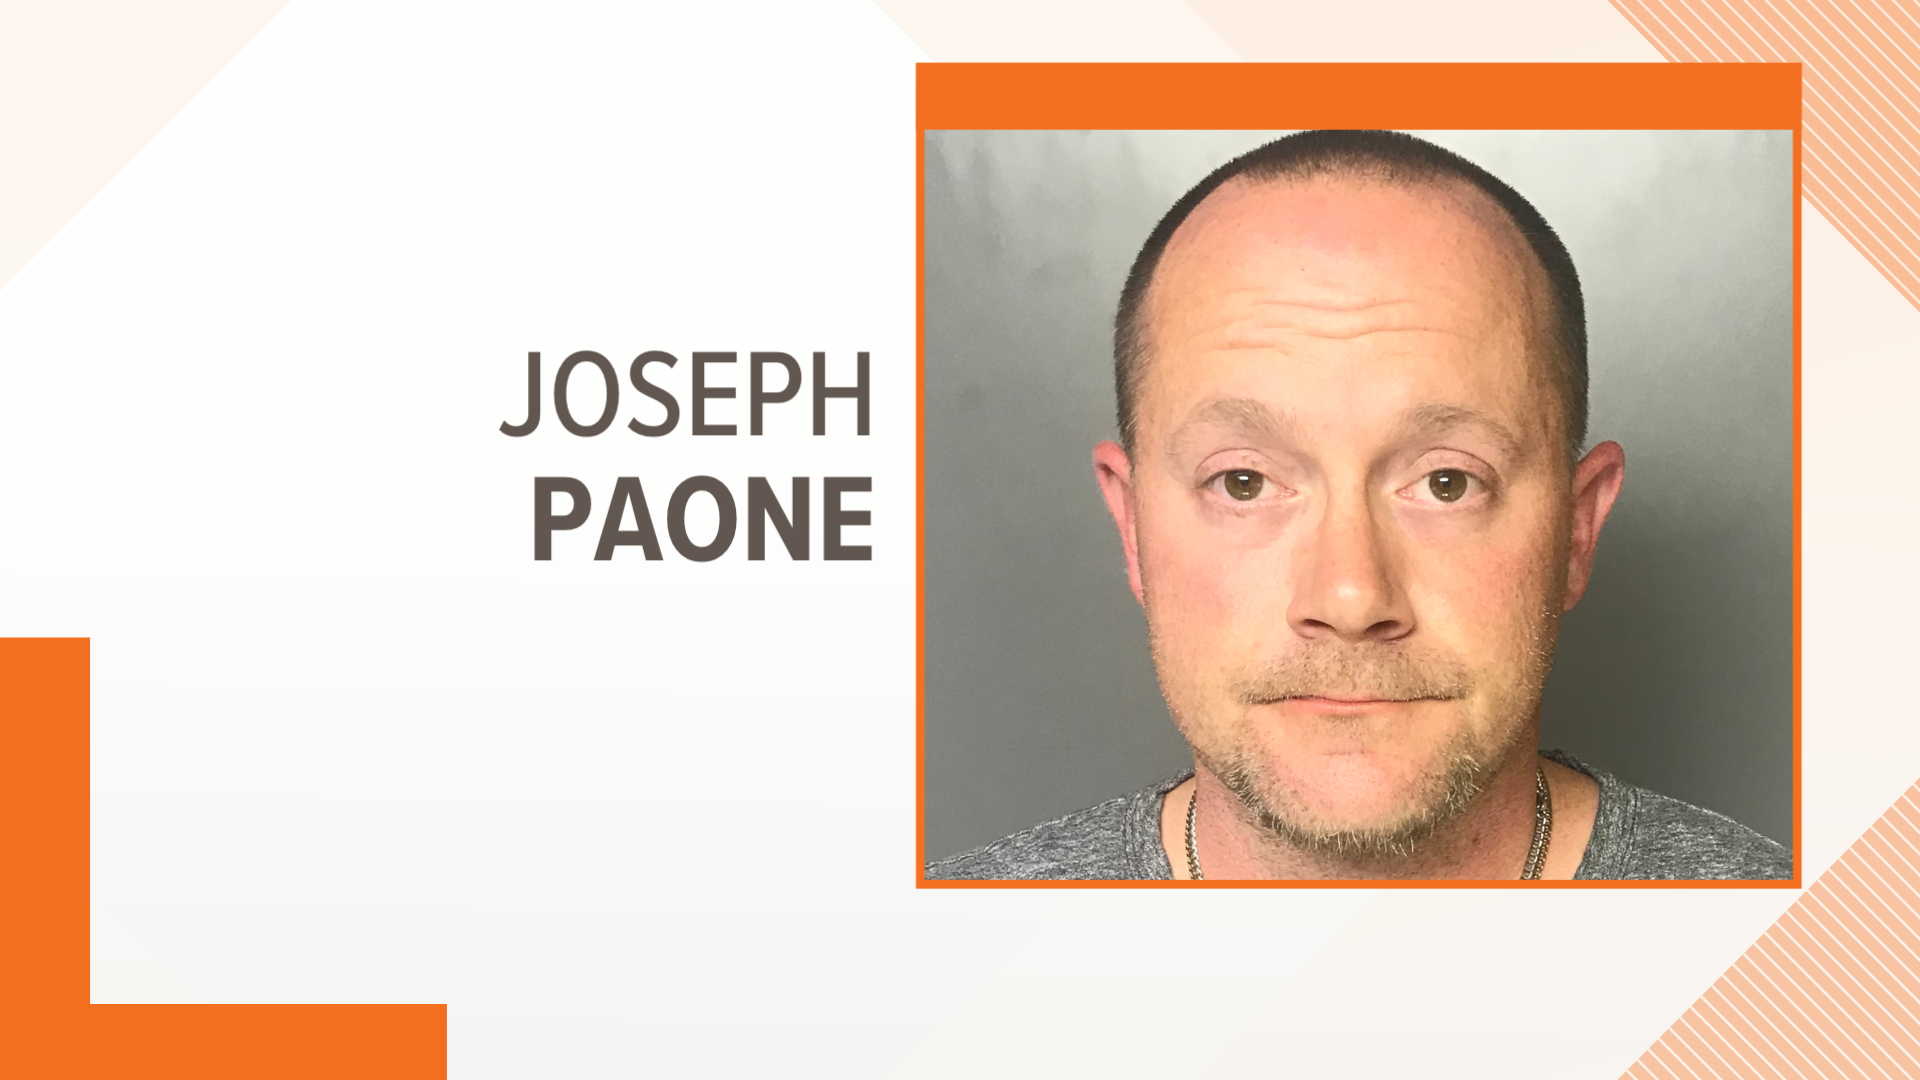 Kingston police say Joseph Paone was talking to who he thought was a 15-year-old girl.